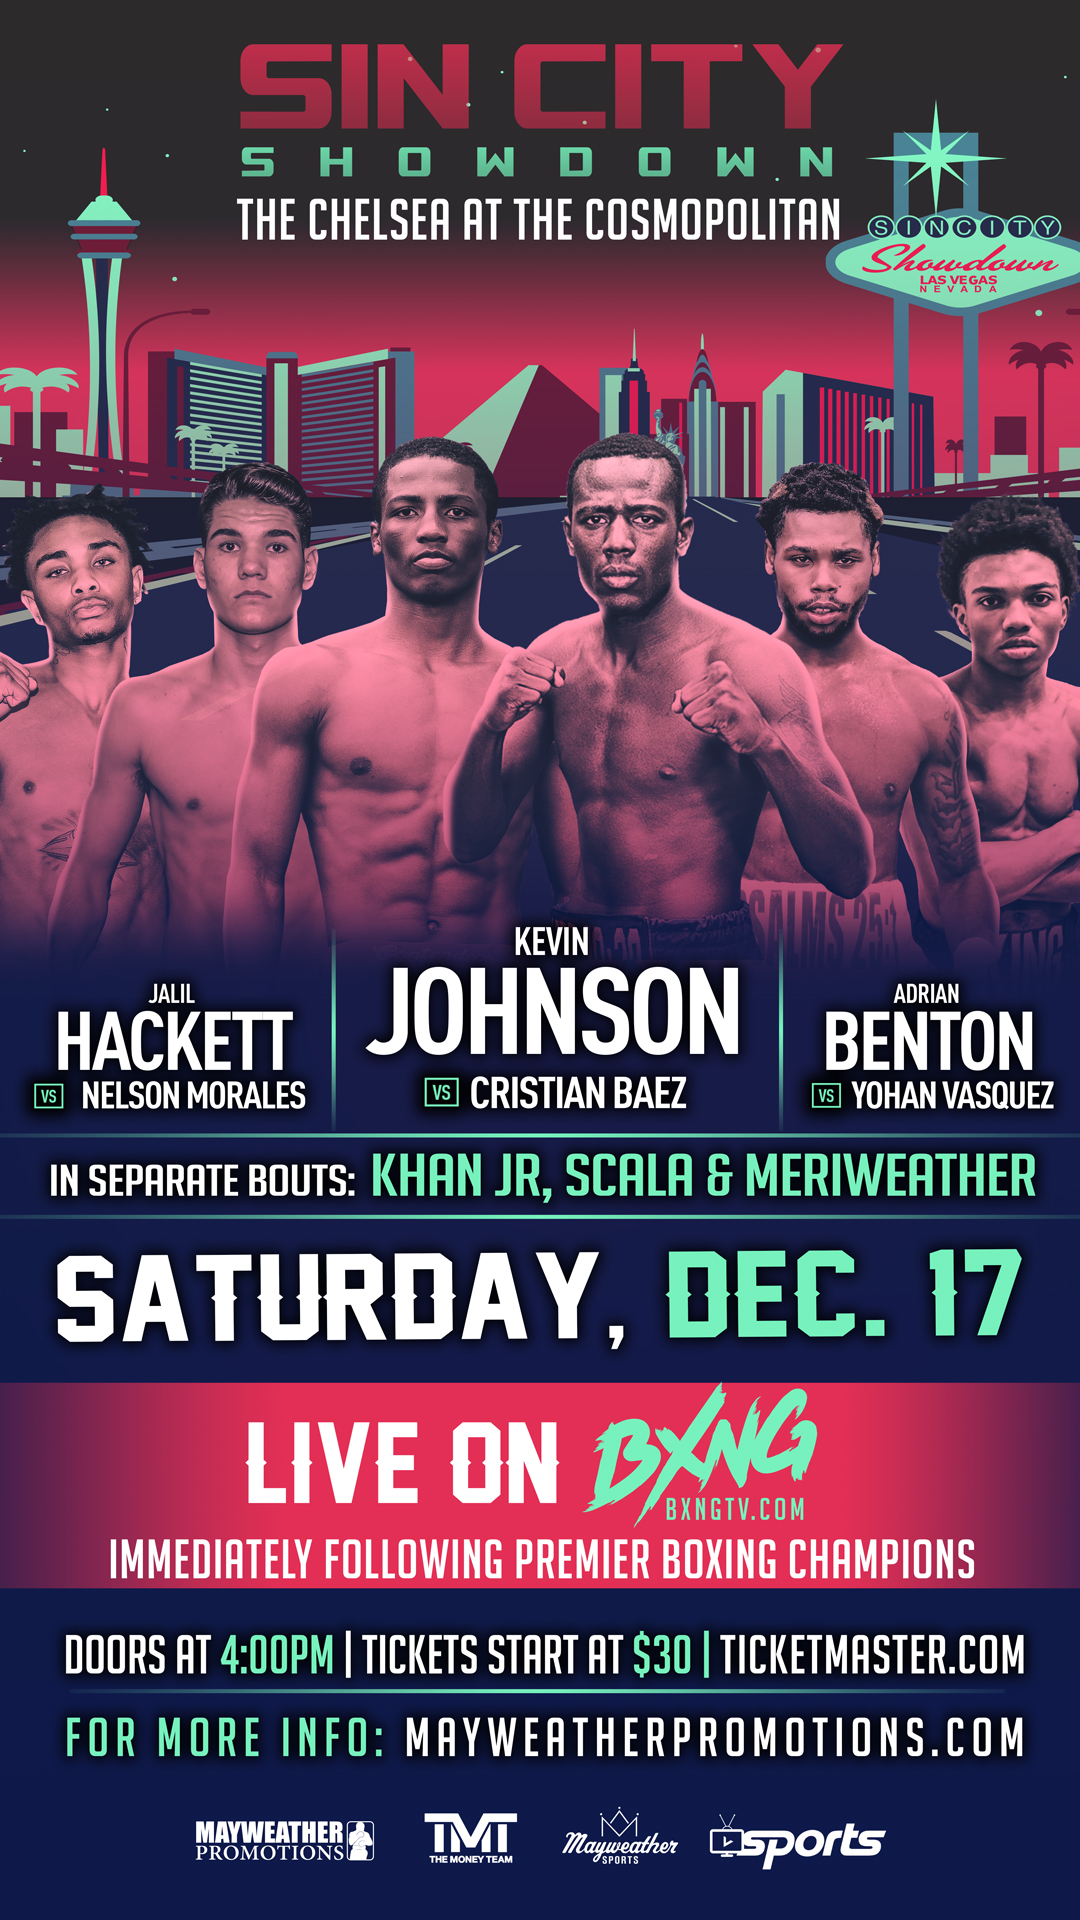 Sin City Showdown featuring Kevin Johnson vs. Cristian Baez on December 17th at The Chelsea!